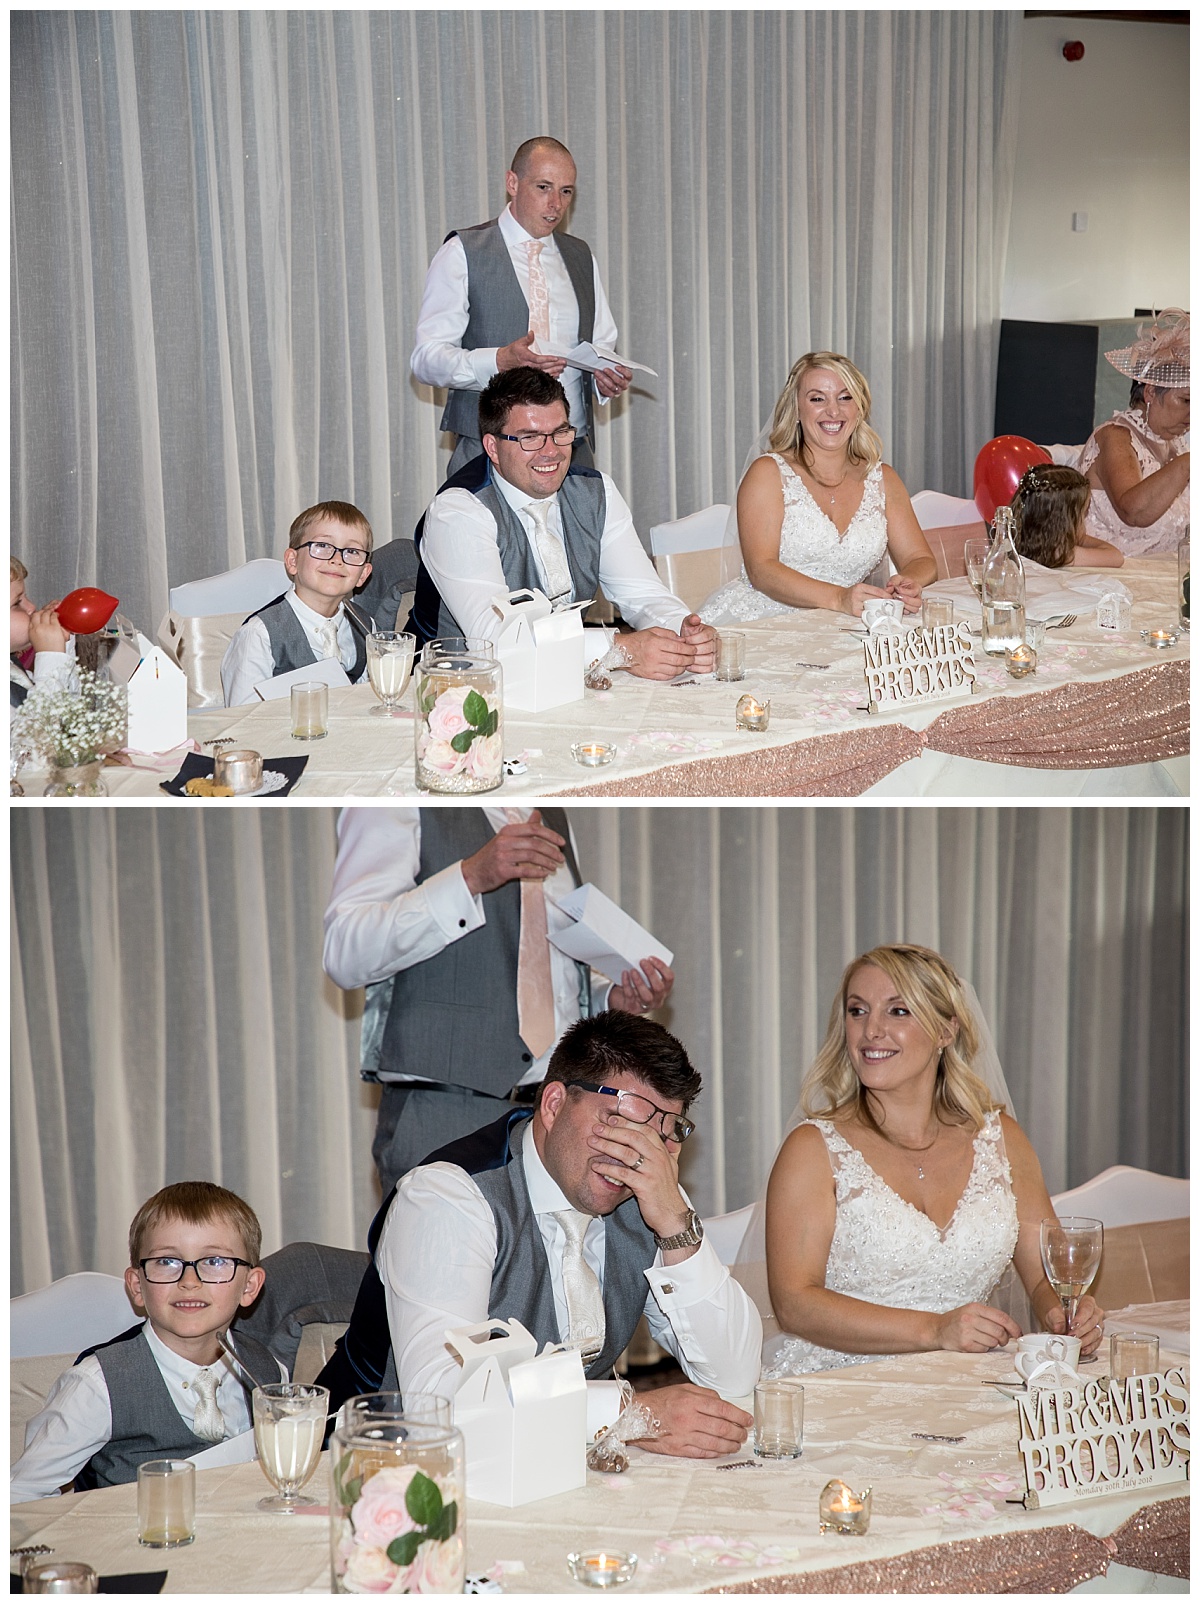 Wedding Photography Manchester - Lisa and James's The Three Horseshoes Country Inn wedding 45